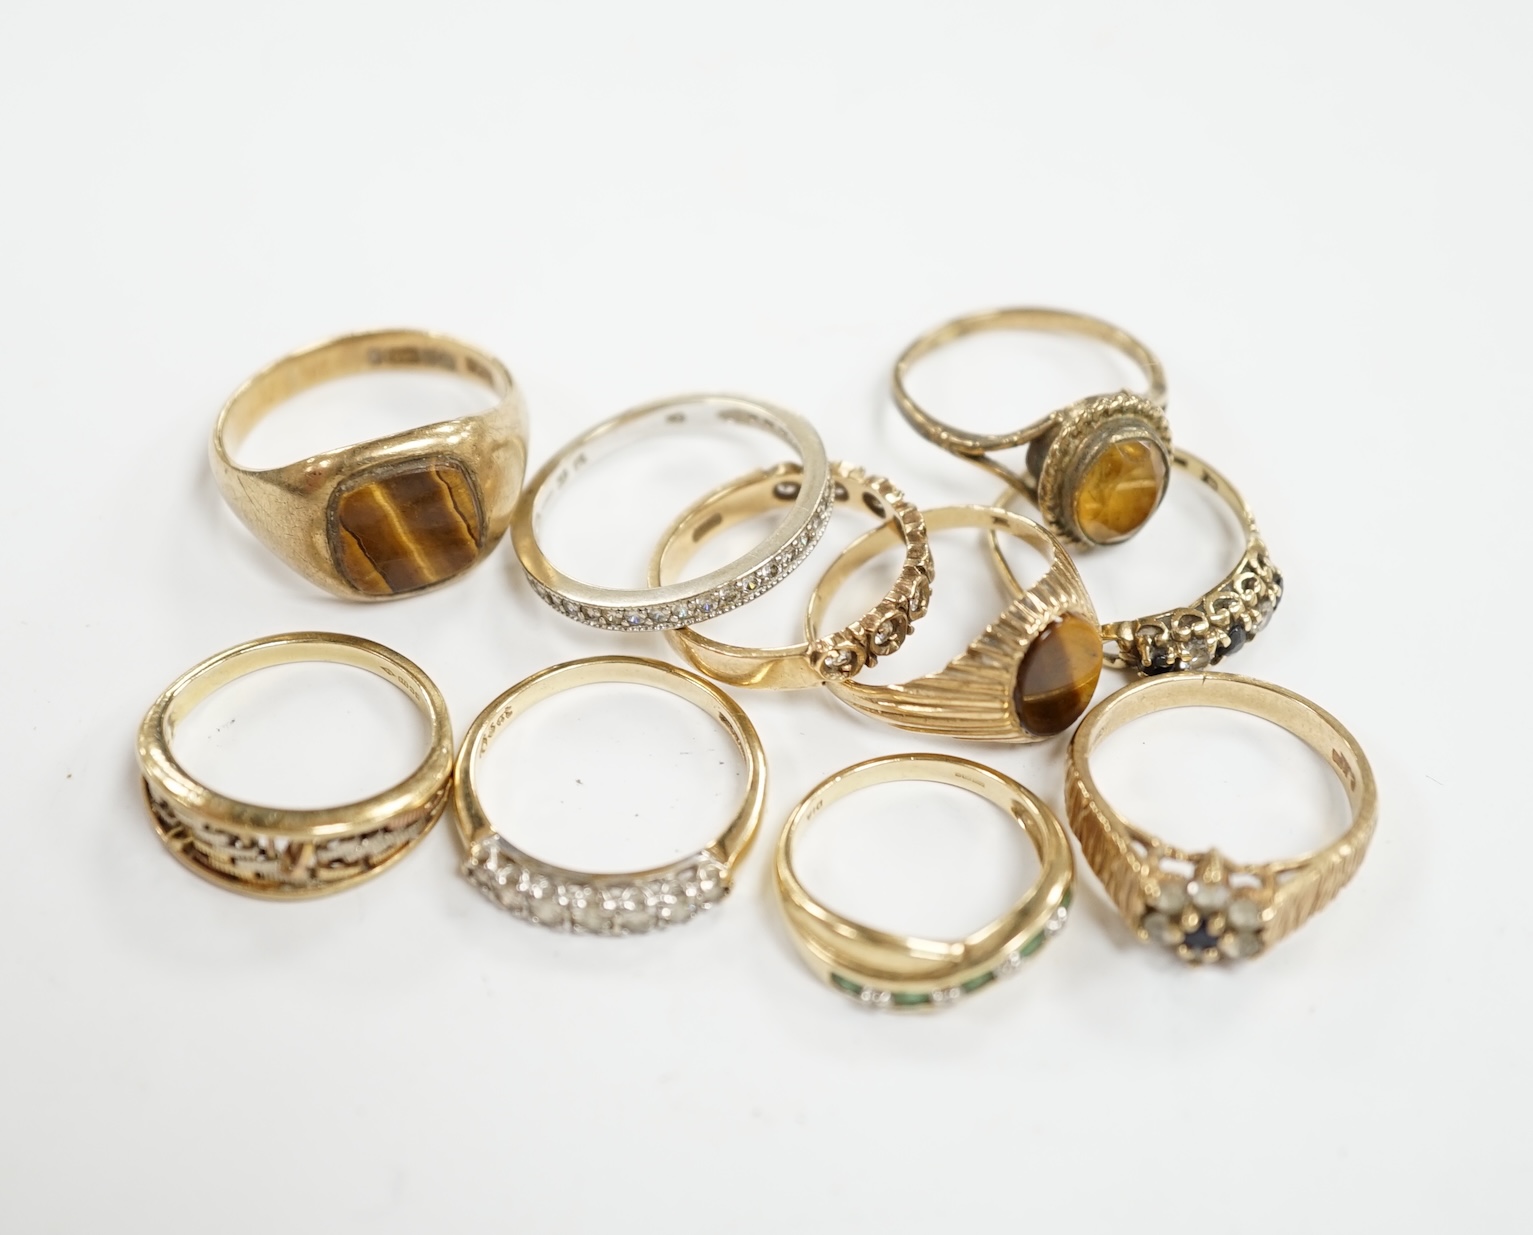 Ten assorted modern 9ct gold and mainly gem set rings, including two with tiger's eye quartz and a seven stone half hoop diamond set, size M/N, gross weight 25.5 grams. Condition - fair